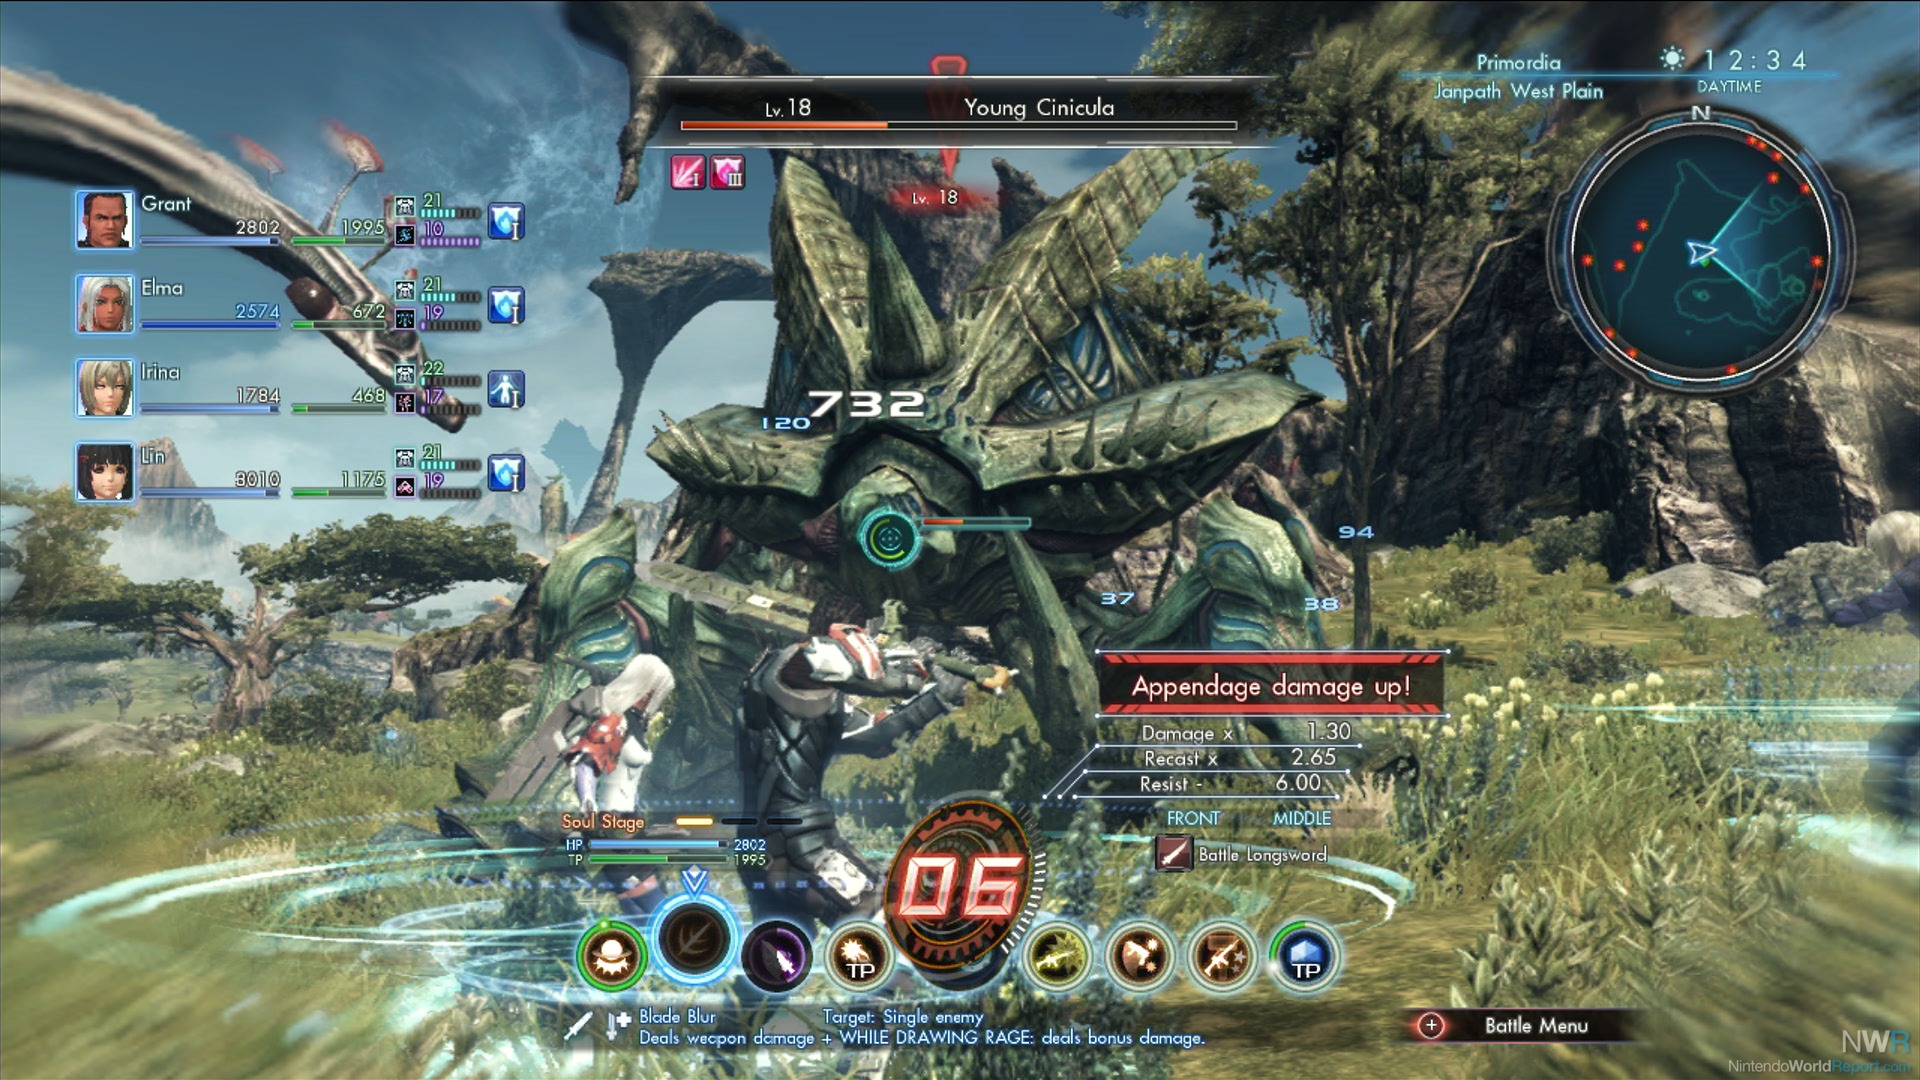 xenoblade chronicles x trailers